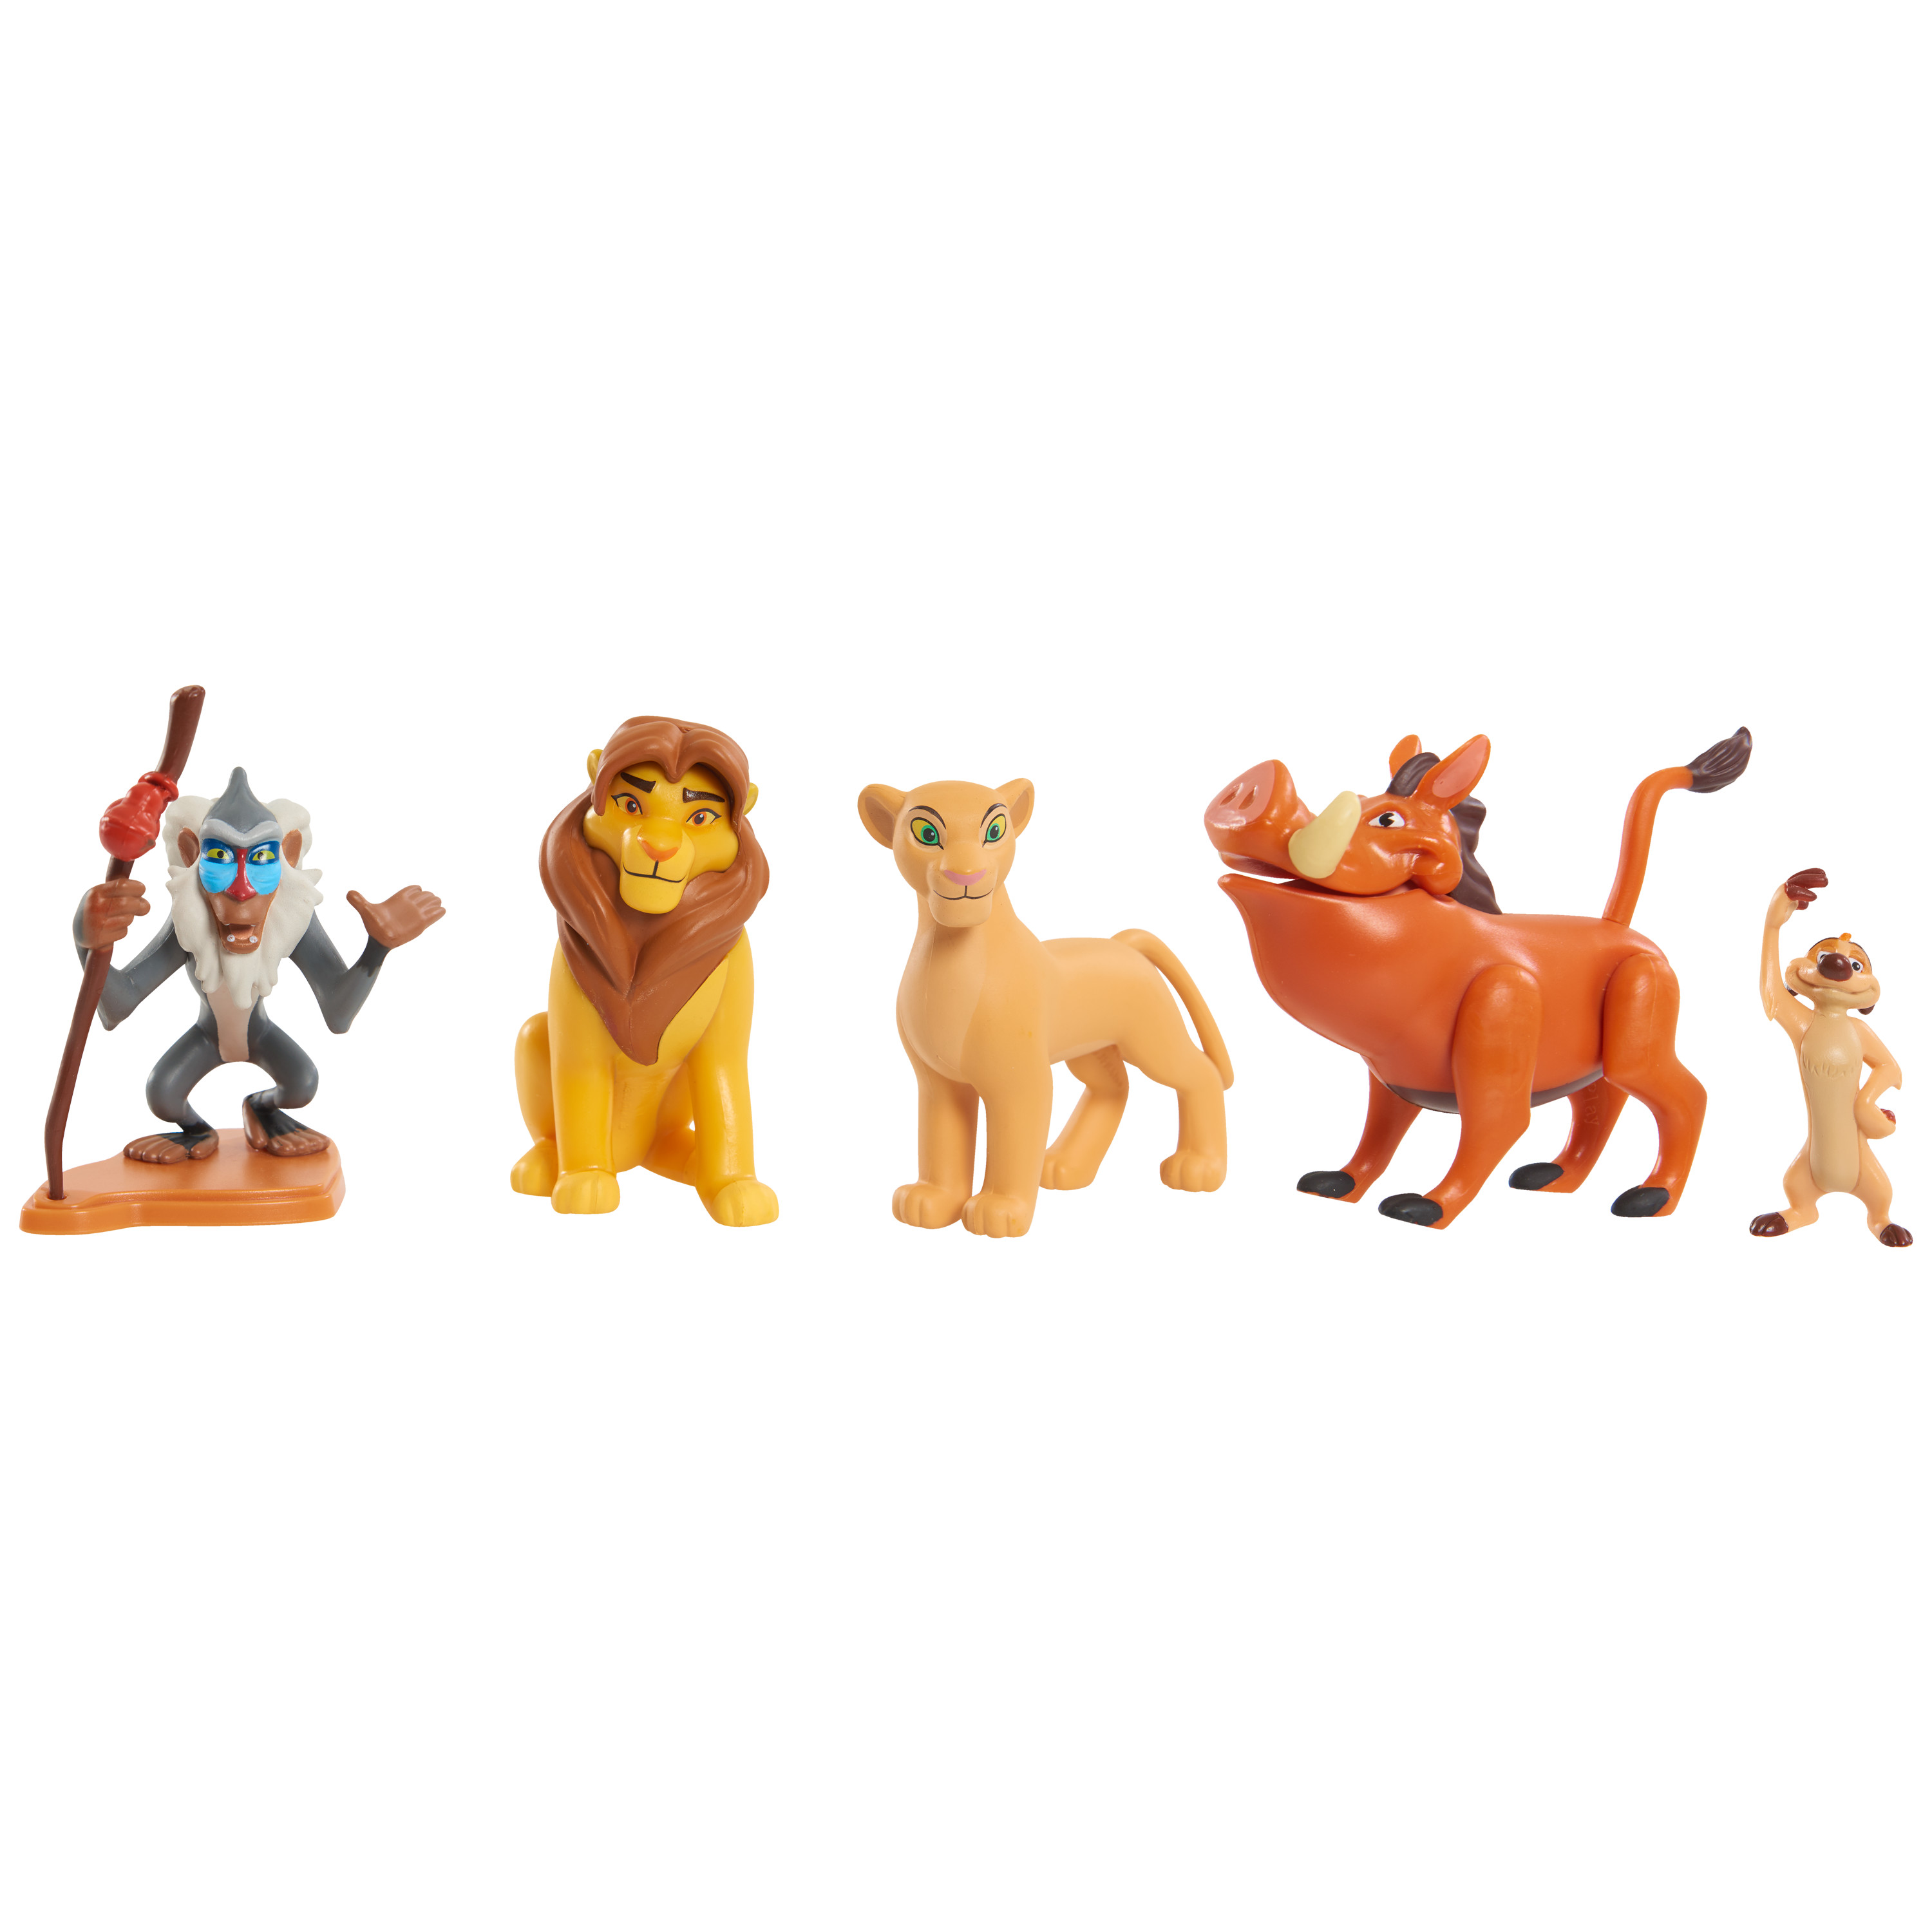 Disney's The Lion King 5-Piece Collectible Figure Set, Officially Licensed Kids Toys for Ages 3 Up, Gifts and Presents - image 1 of 2